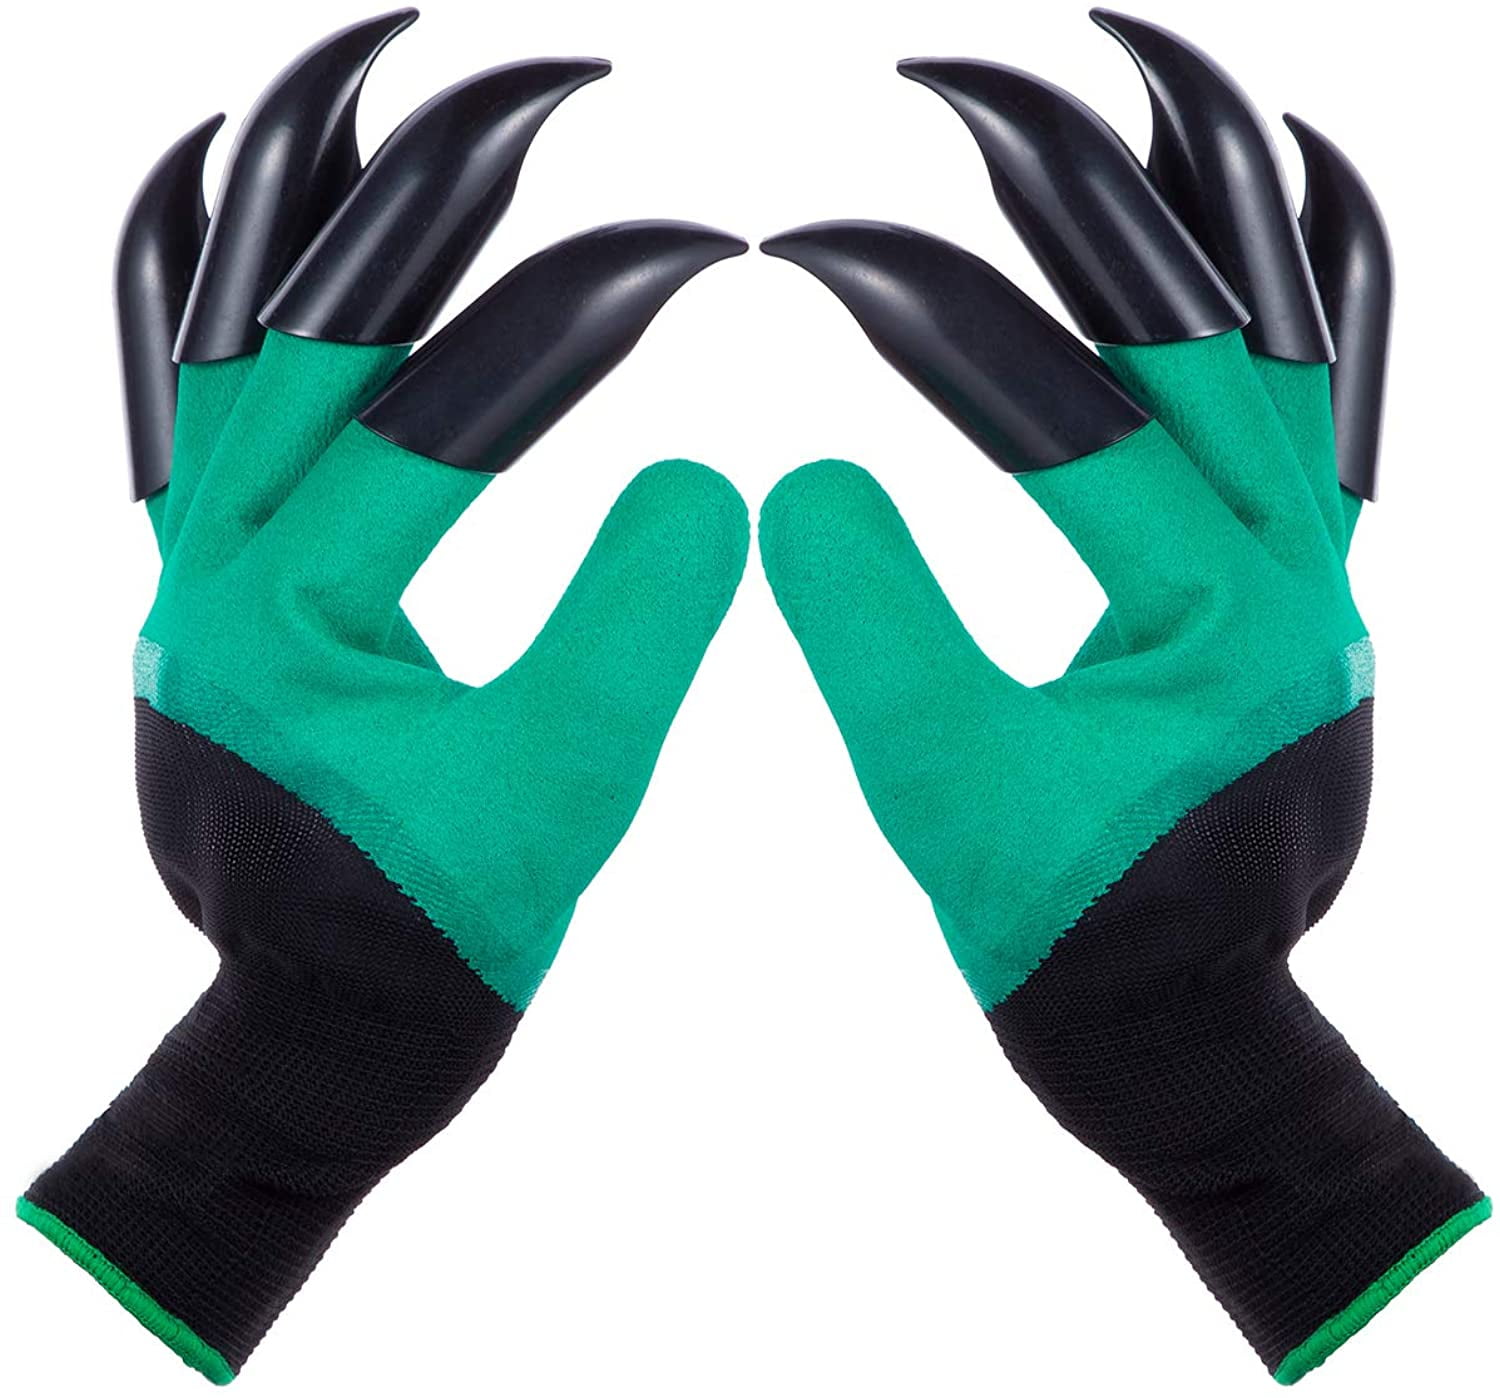 NON-SLIP GARDENING GLOVES Waterproof Hand Protection/Safety Latex Coated Unisex 